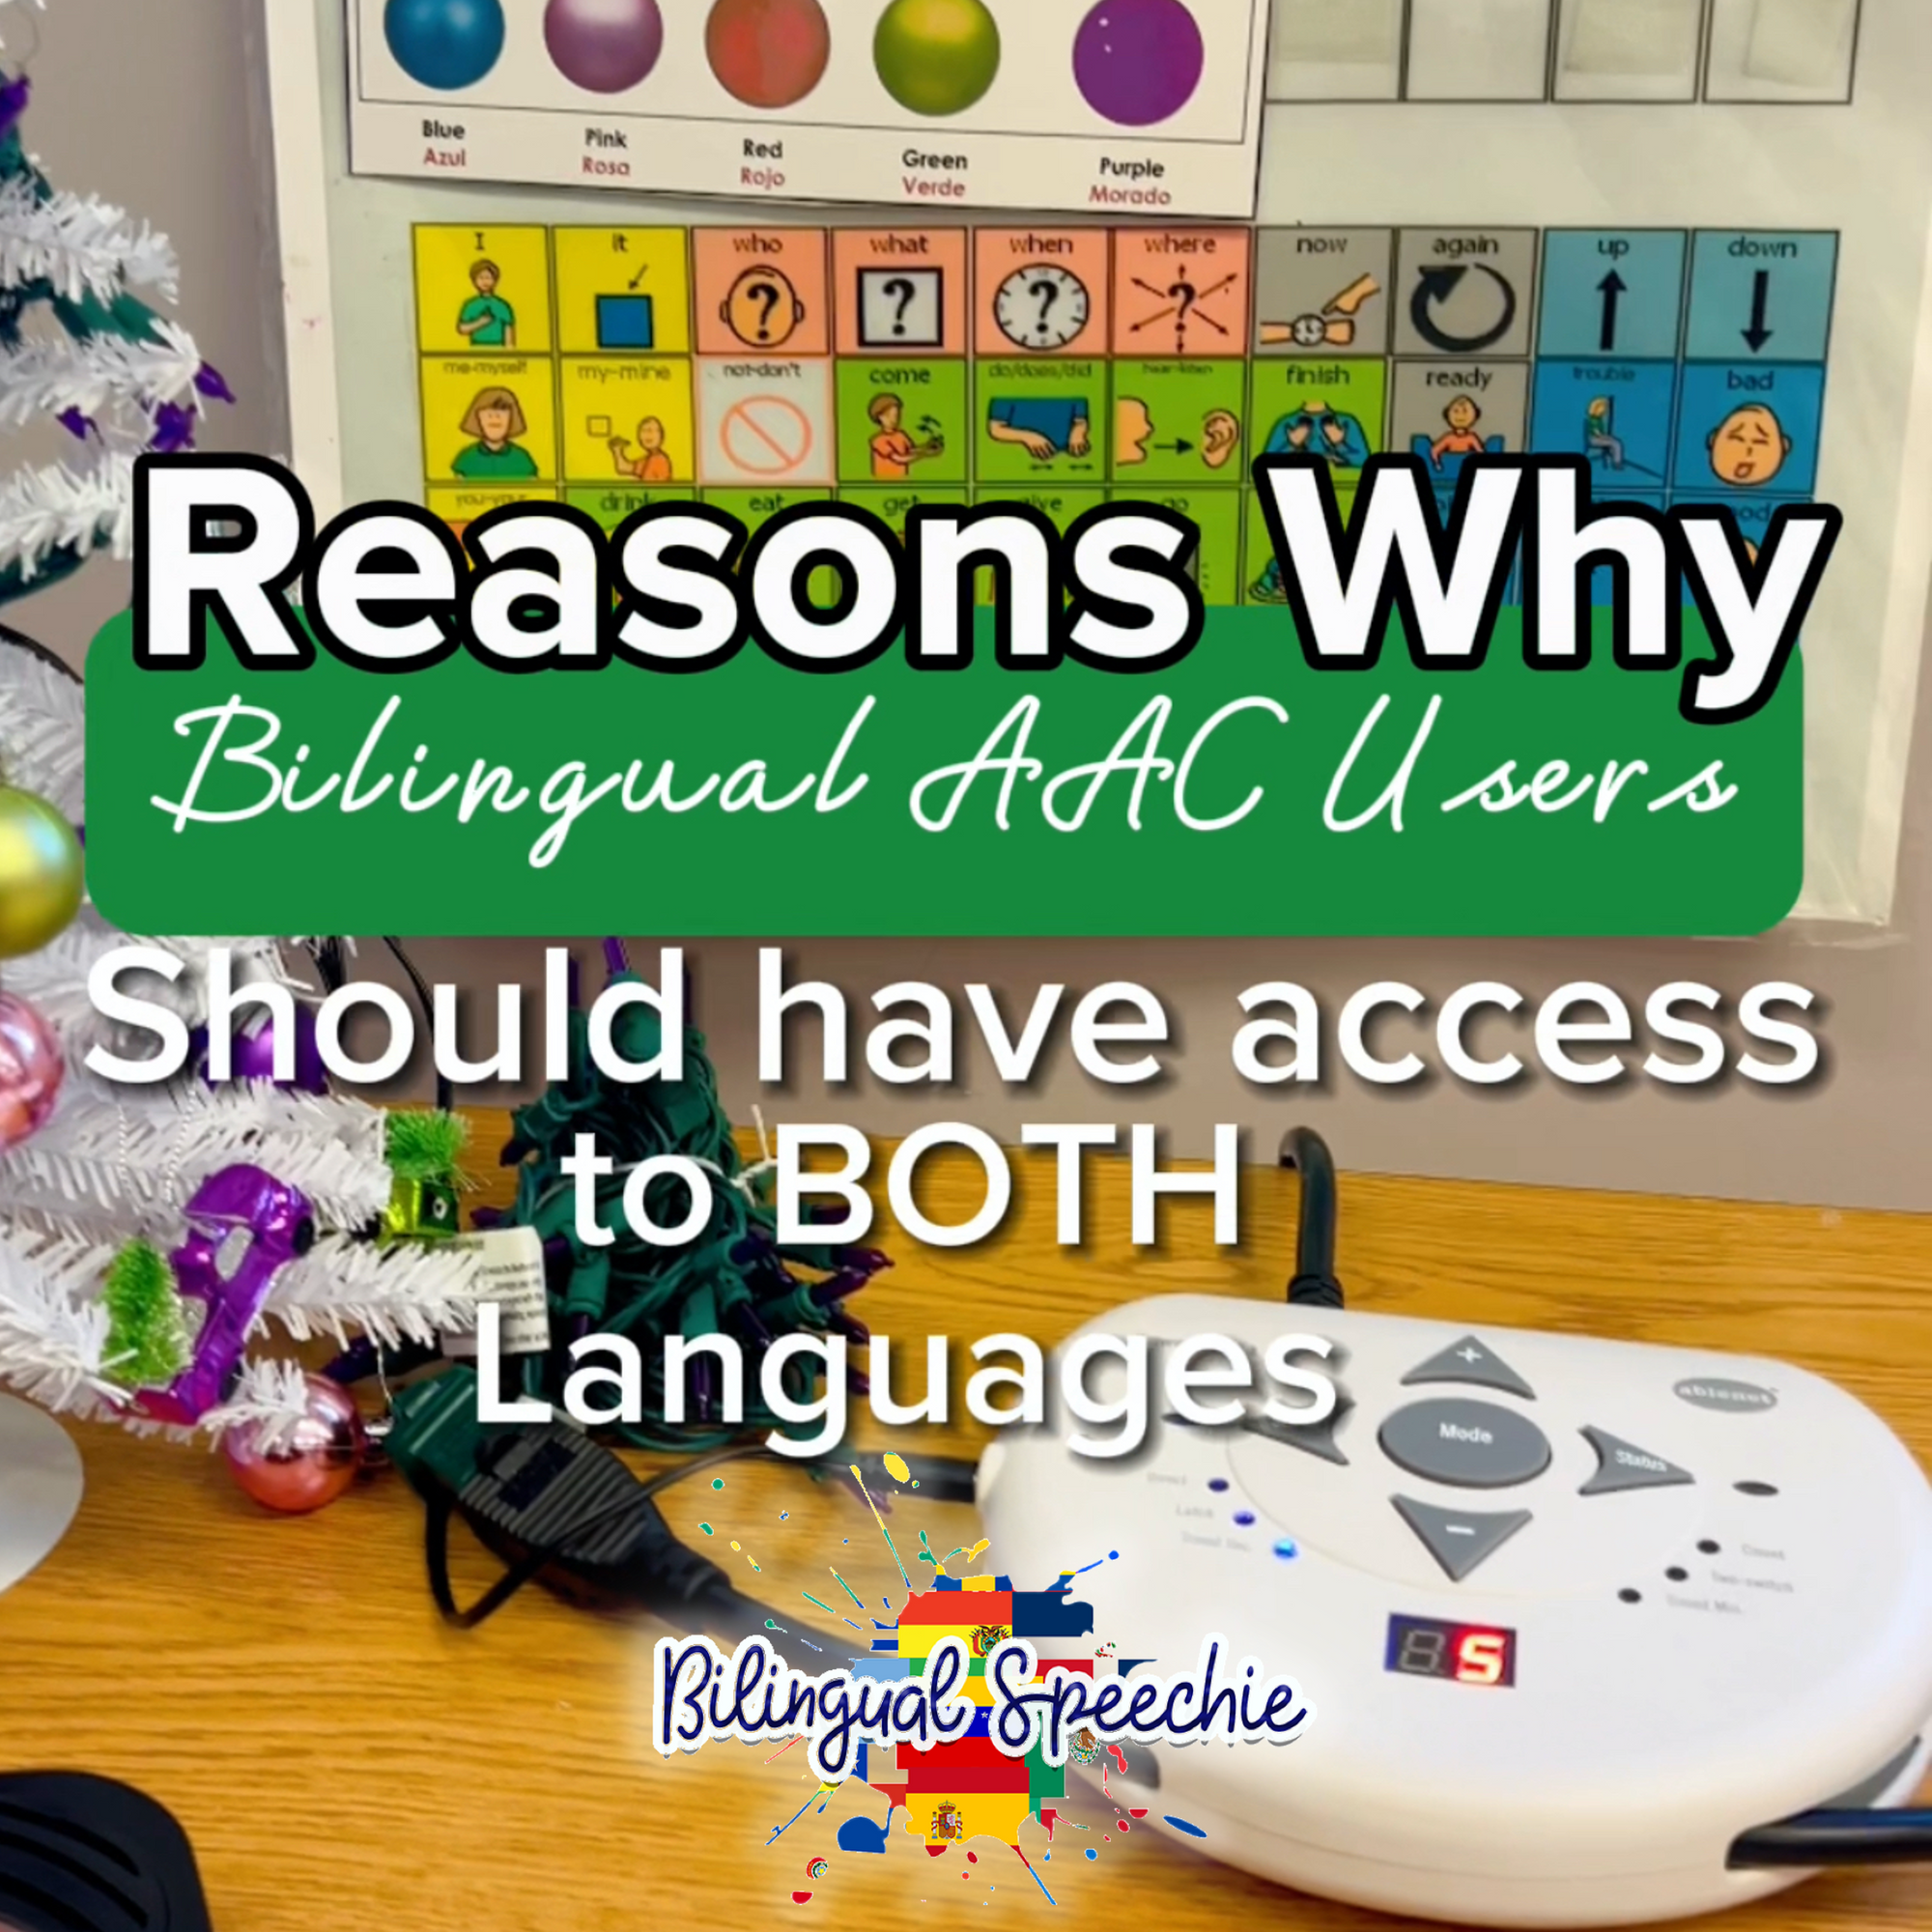 Why Bilingual AAC Users Should Have Access to Both Languages